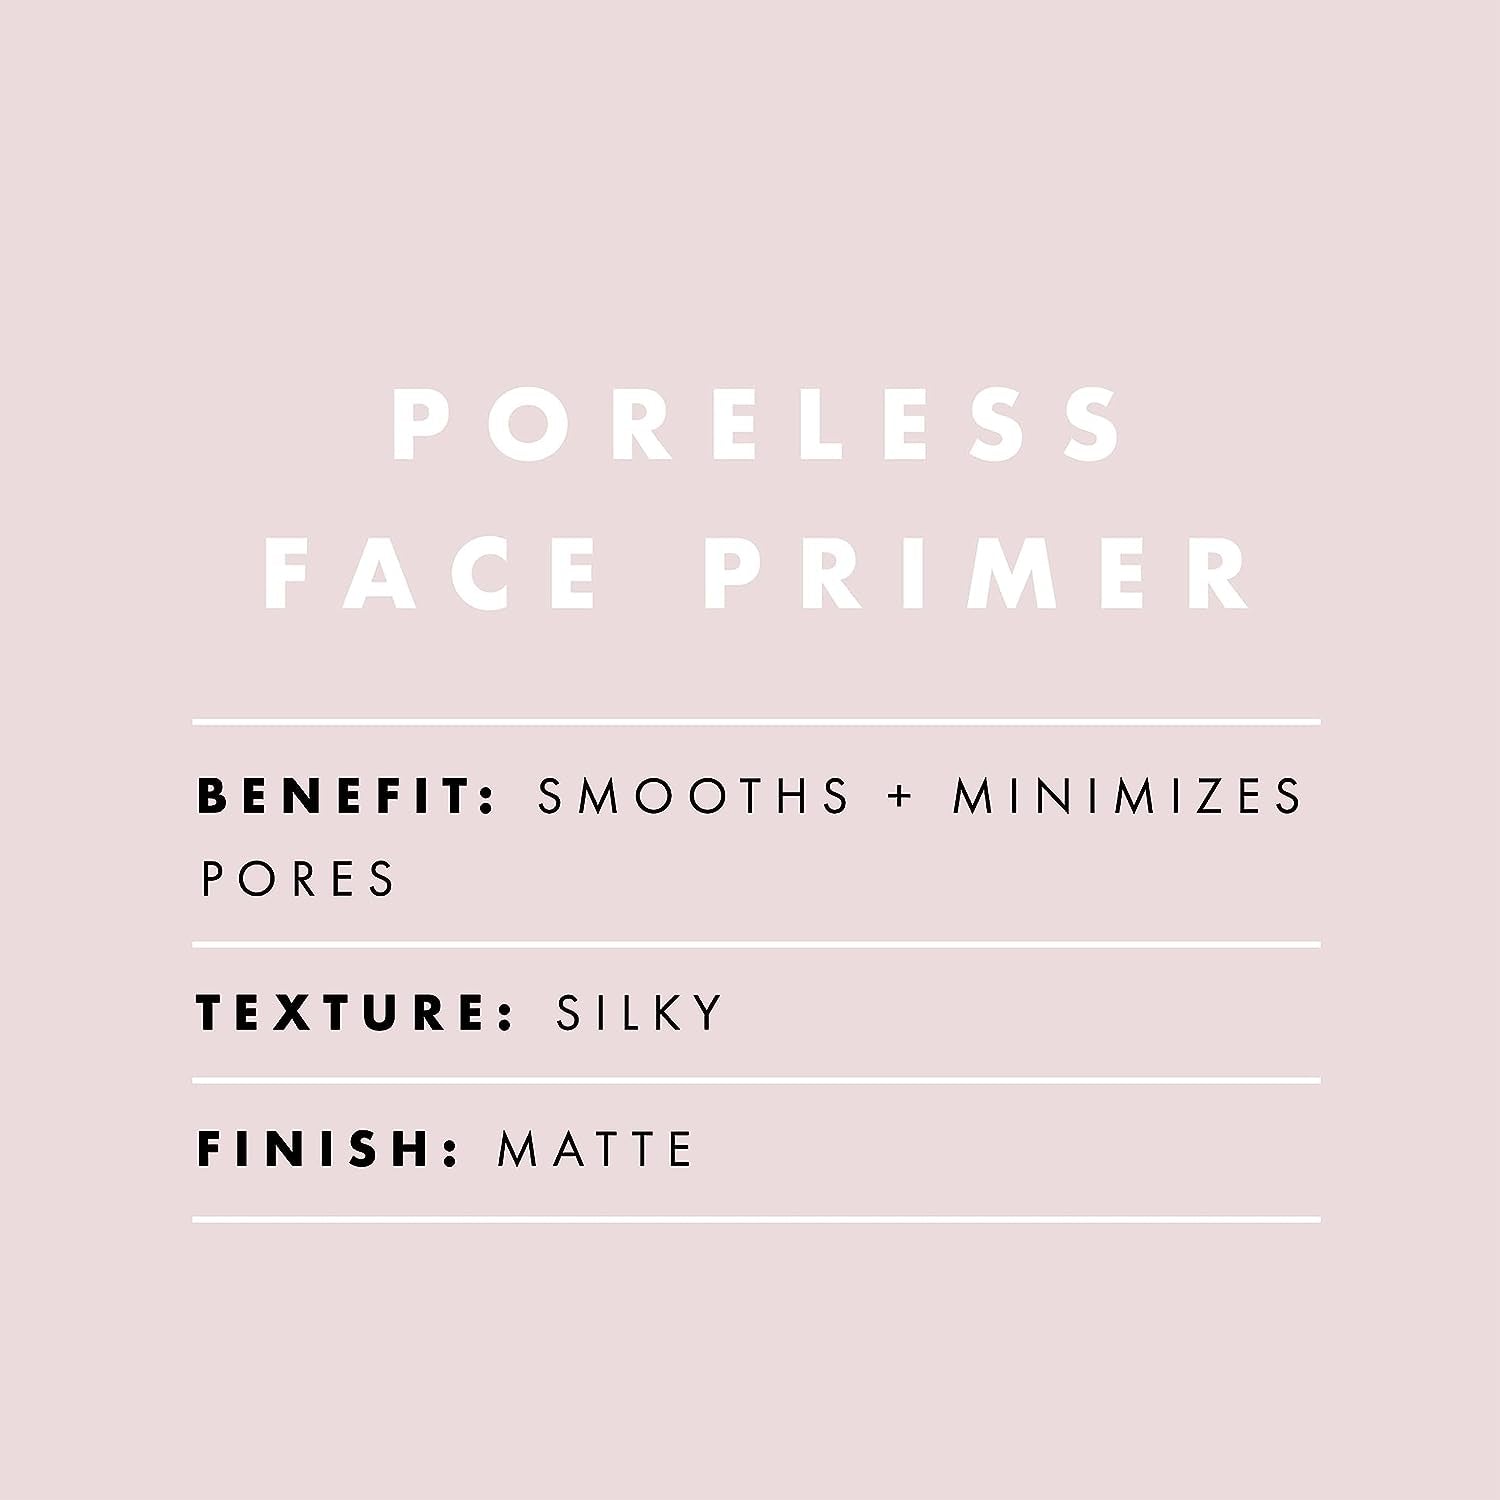 Poreless Face Primer, Restoring Makeup Primer for a Flawless, Smooth Canvas, Infused with Tea Tree & Vitamin A, Vegan & Cruelty-Free, 0.47 Fl Oz